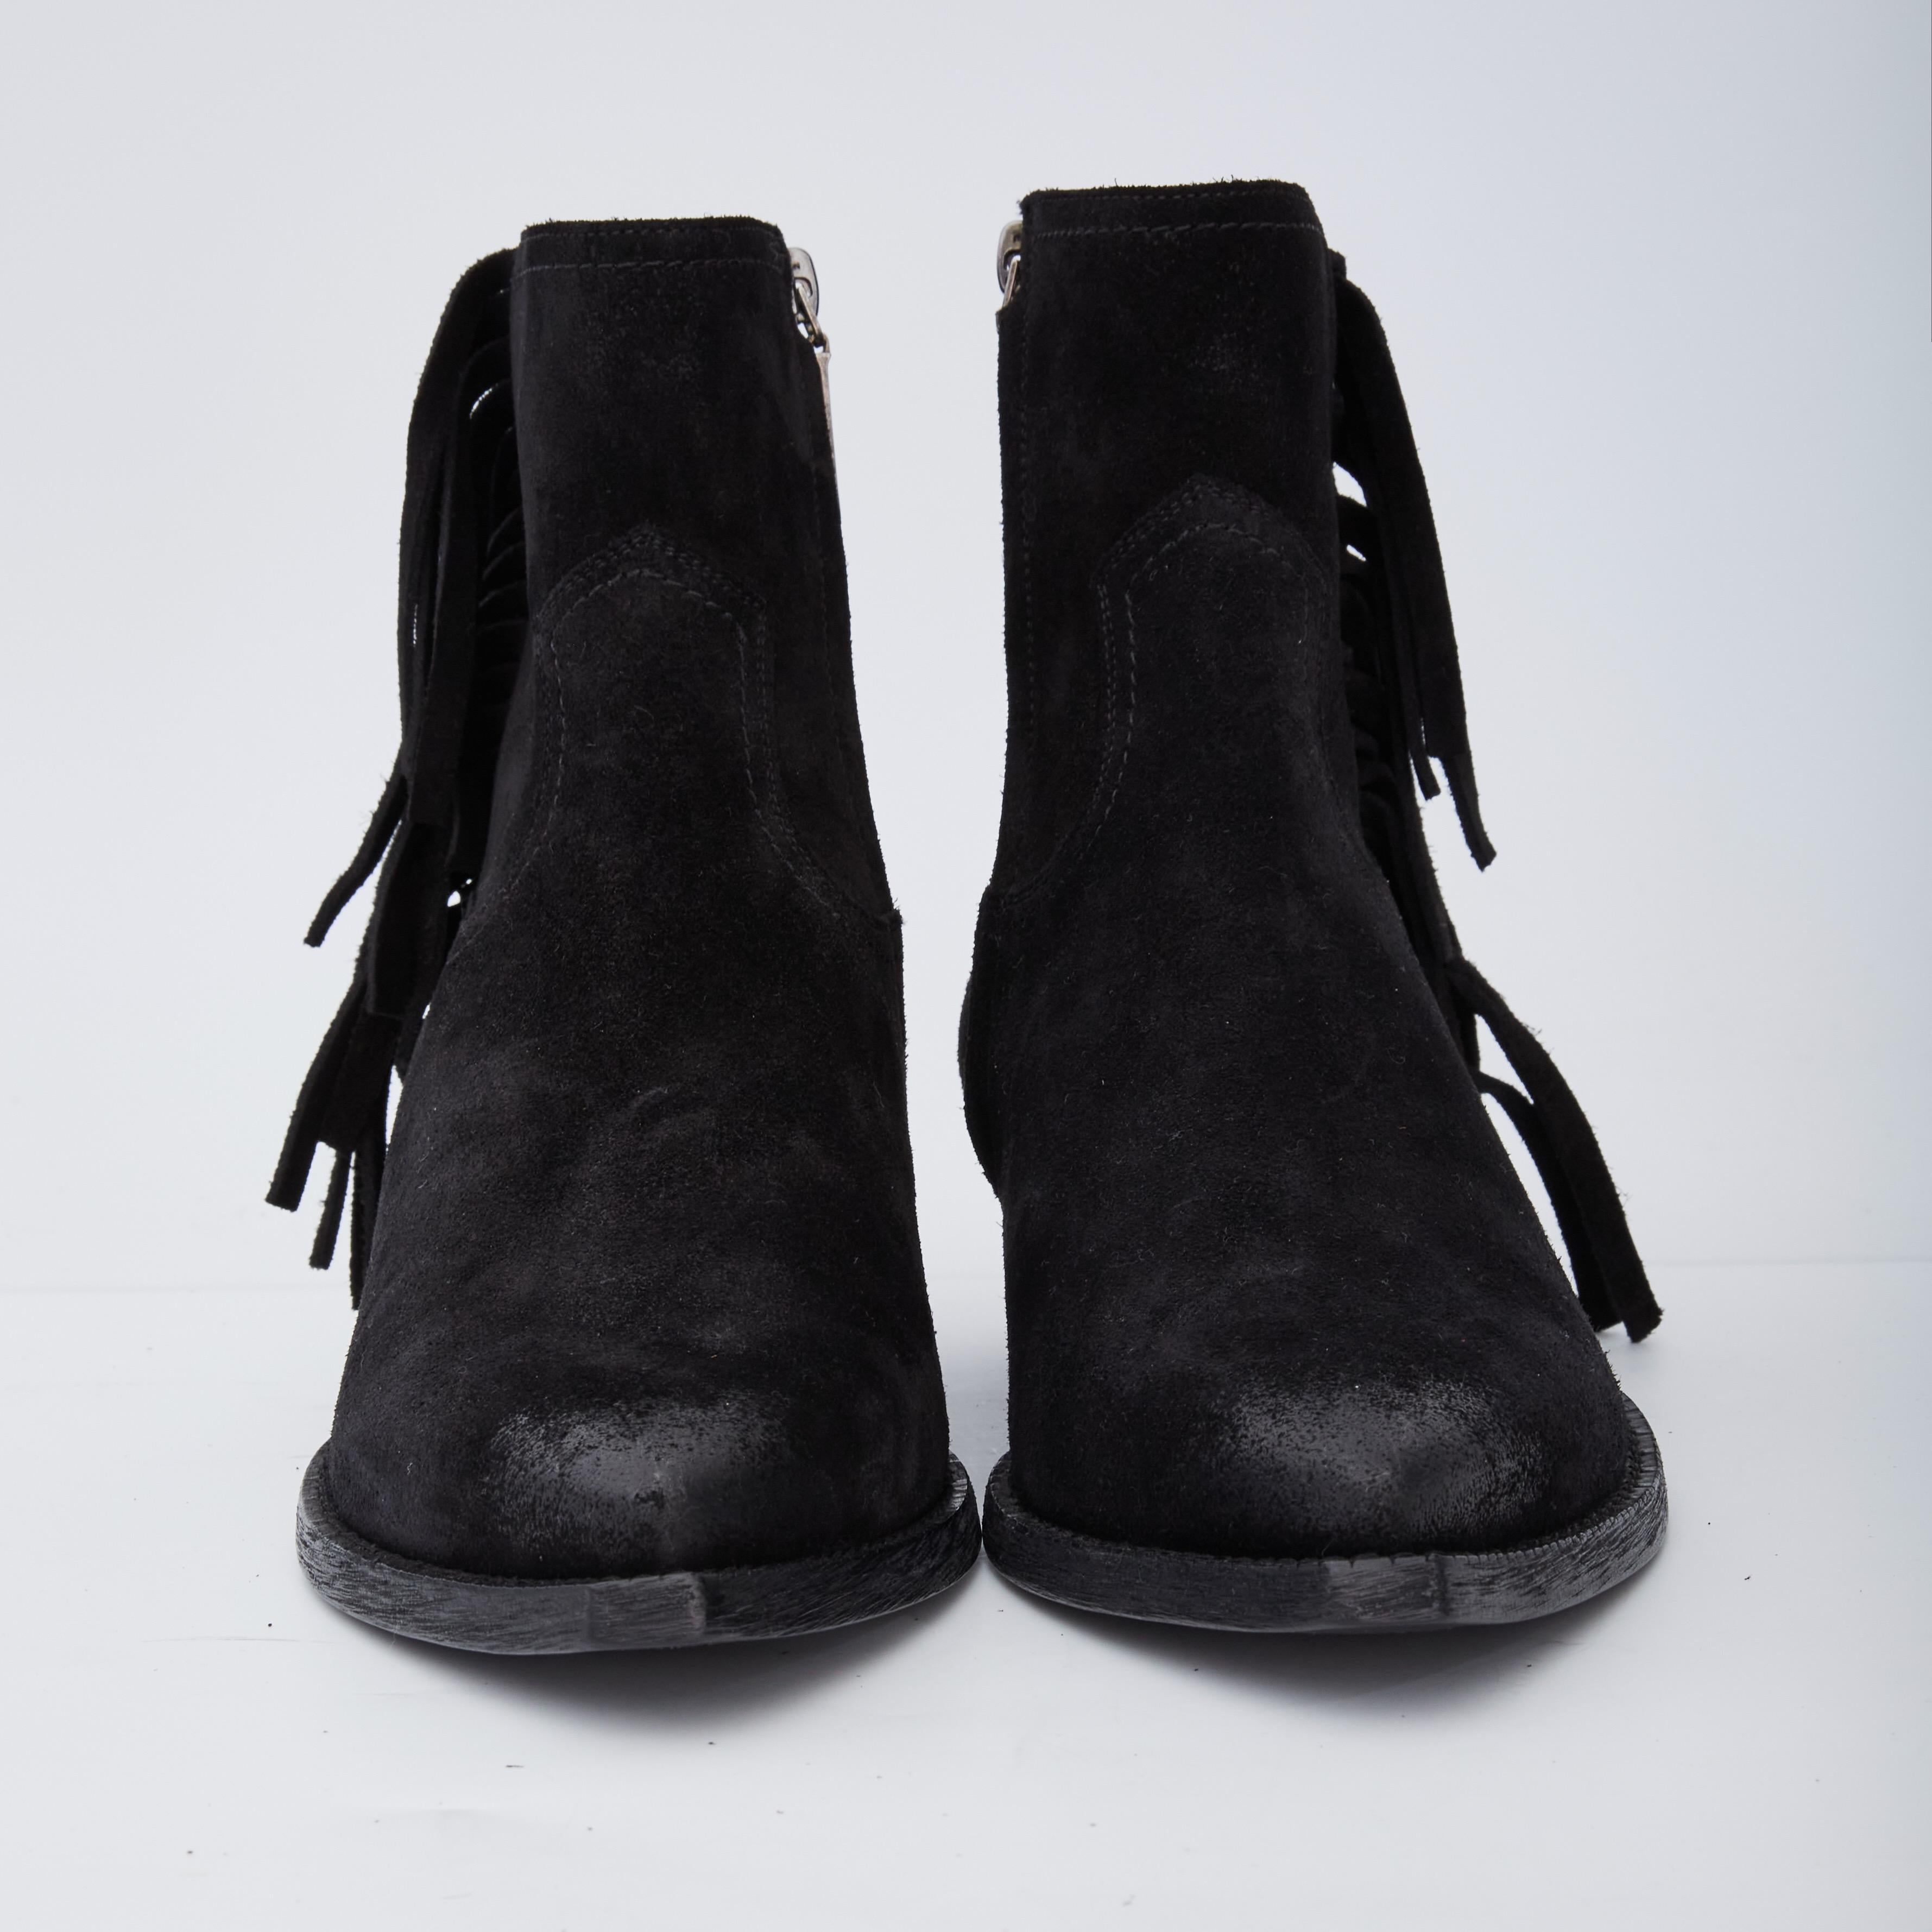 Women's Saint Laurent black sueded buckle booties.

COLOR: Black
MATERIAL: Suede
ITEM CODE: 565591
SIZE: 38 EU / 7 US
HEEL HEIGHT: 40 mm / .9”
CONDITION: New
COMES WITH: Dust bag and box 

Made in Italy